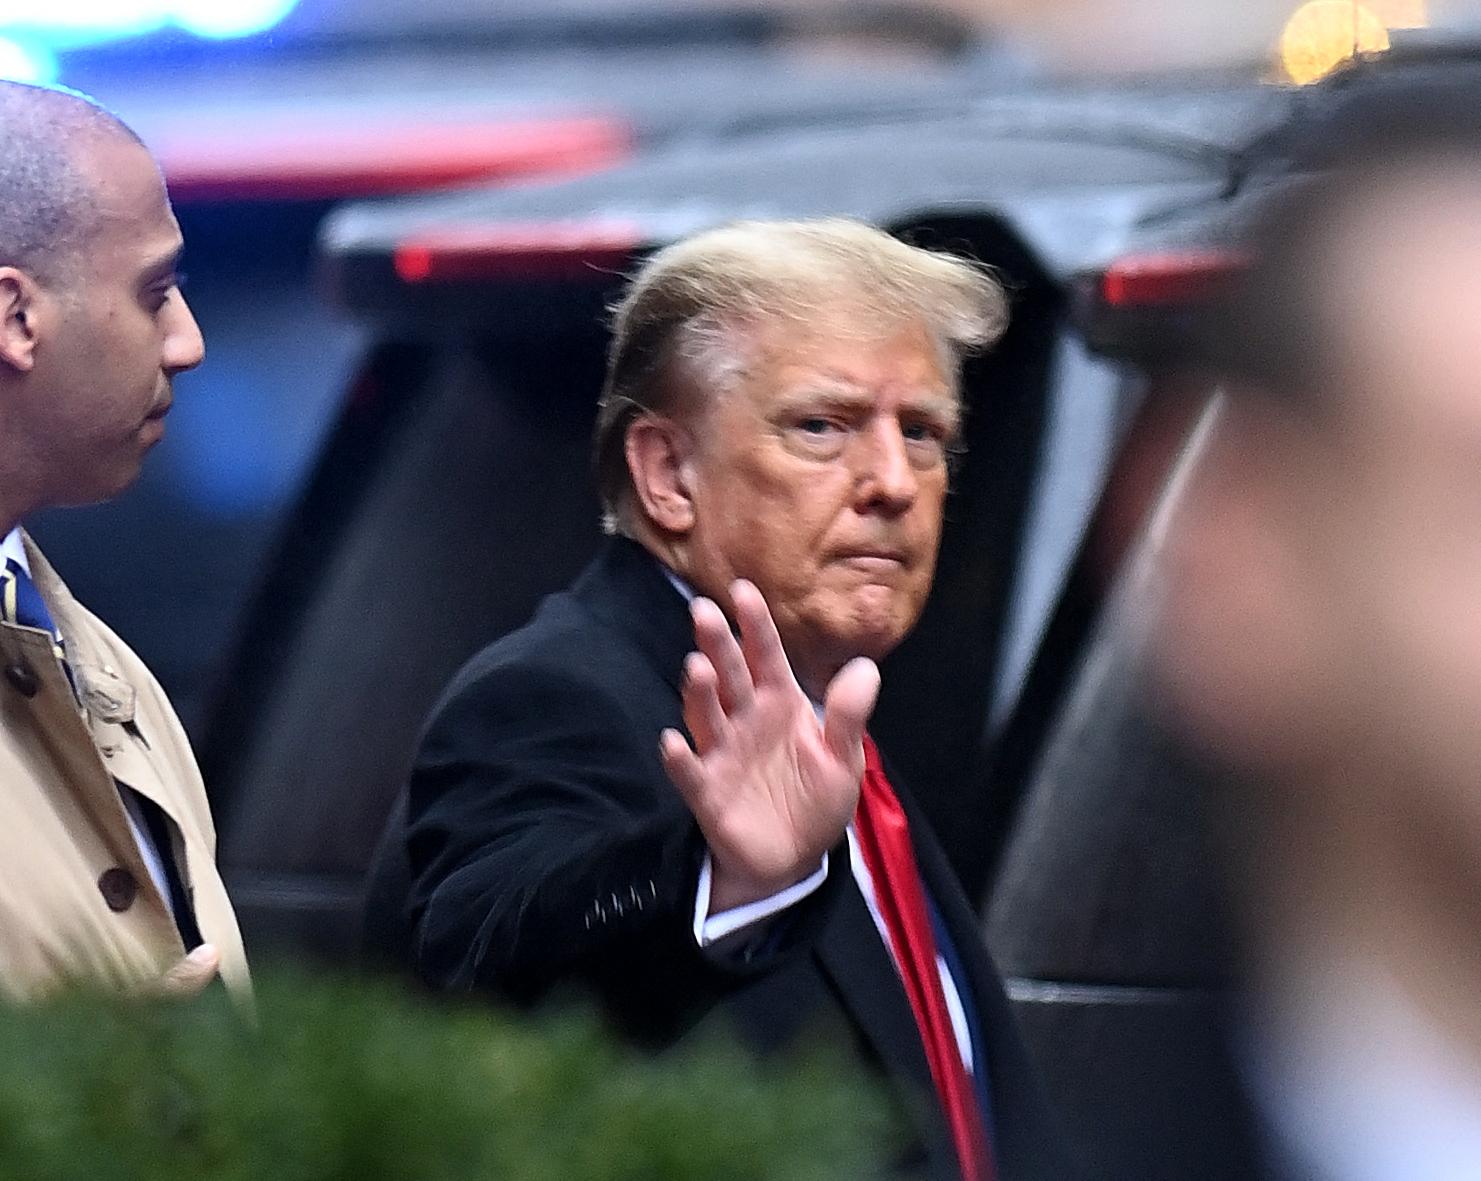 Former President Donald Trump leaves Trump Tower on Fifth Avenue on his way to Federal Court for the ongoing defamation trial brought by E.Jean Carroll in lower Manhattan. Today there will be the closing statements.